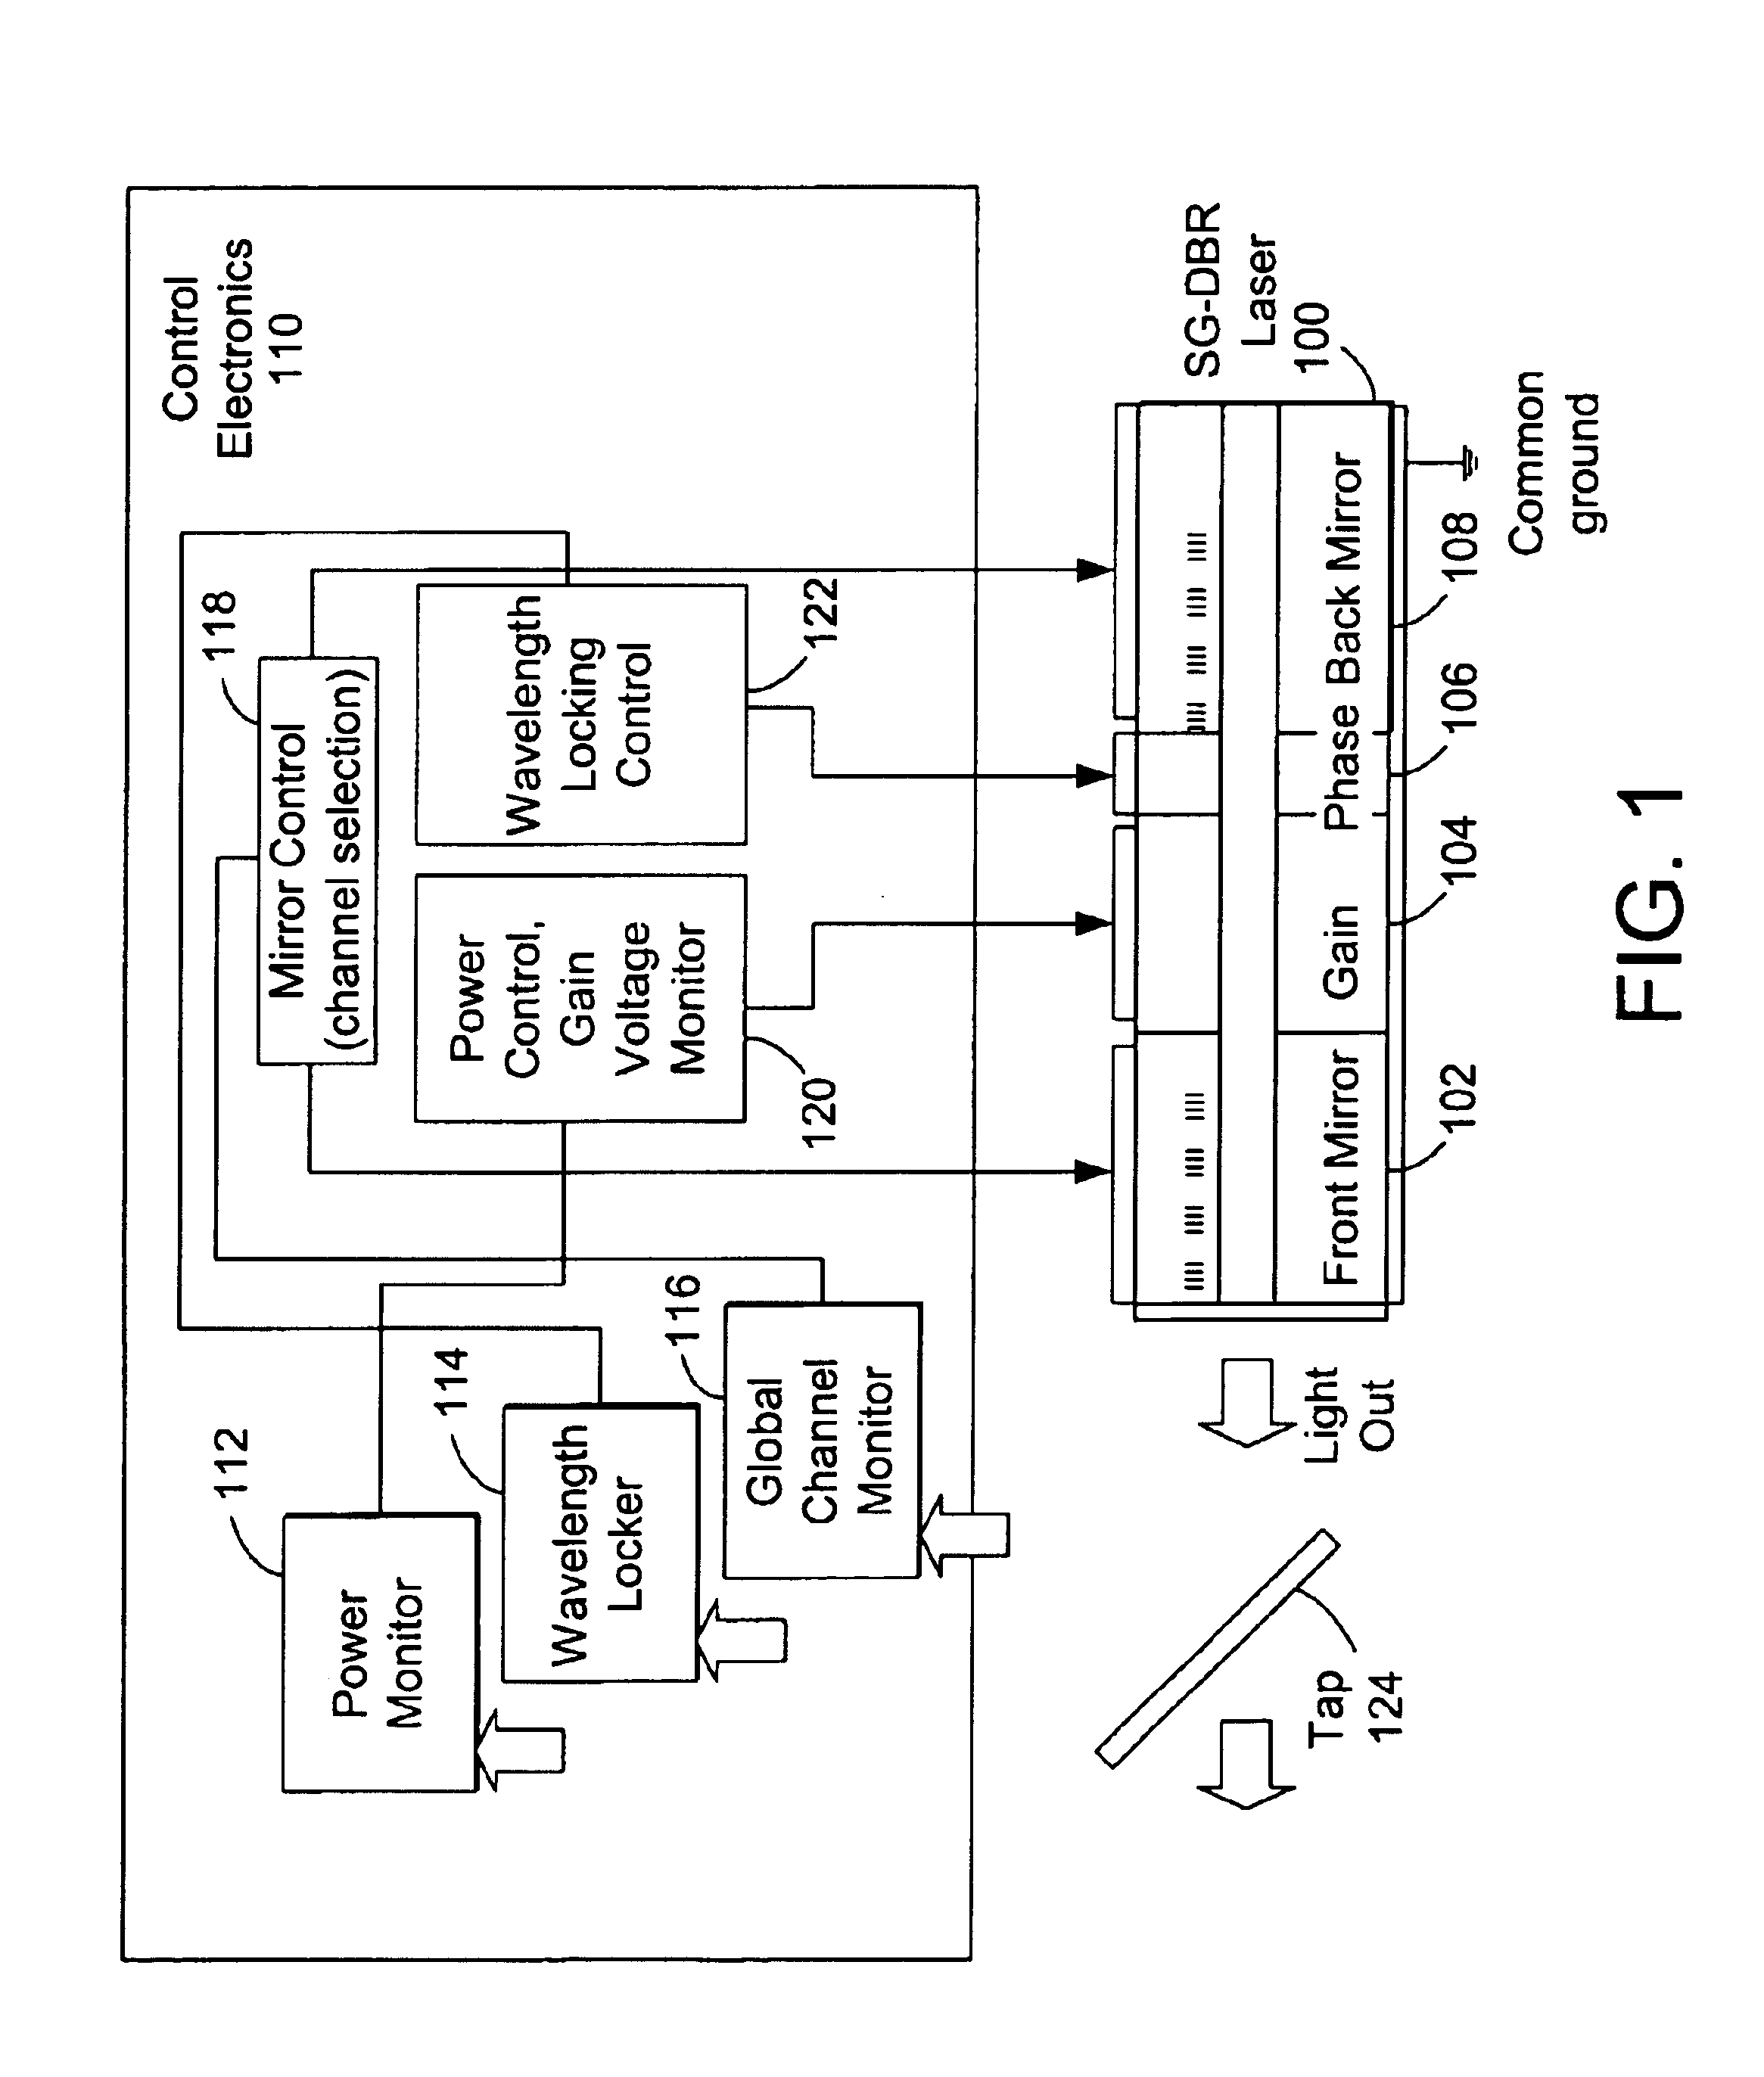 Methods for robust channel switching of widely-tunable sampled-grating distributed bragg reflector lasers